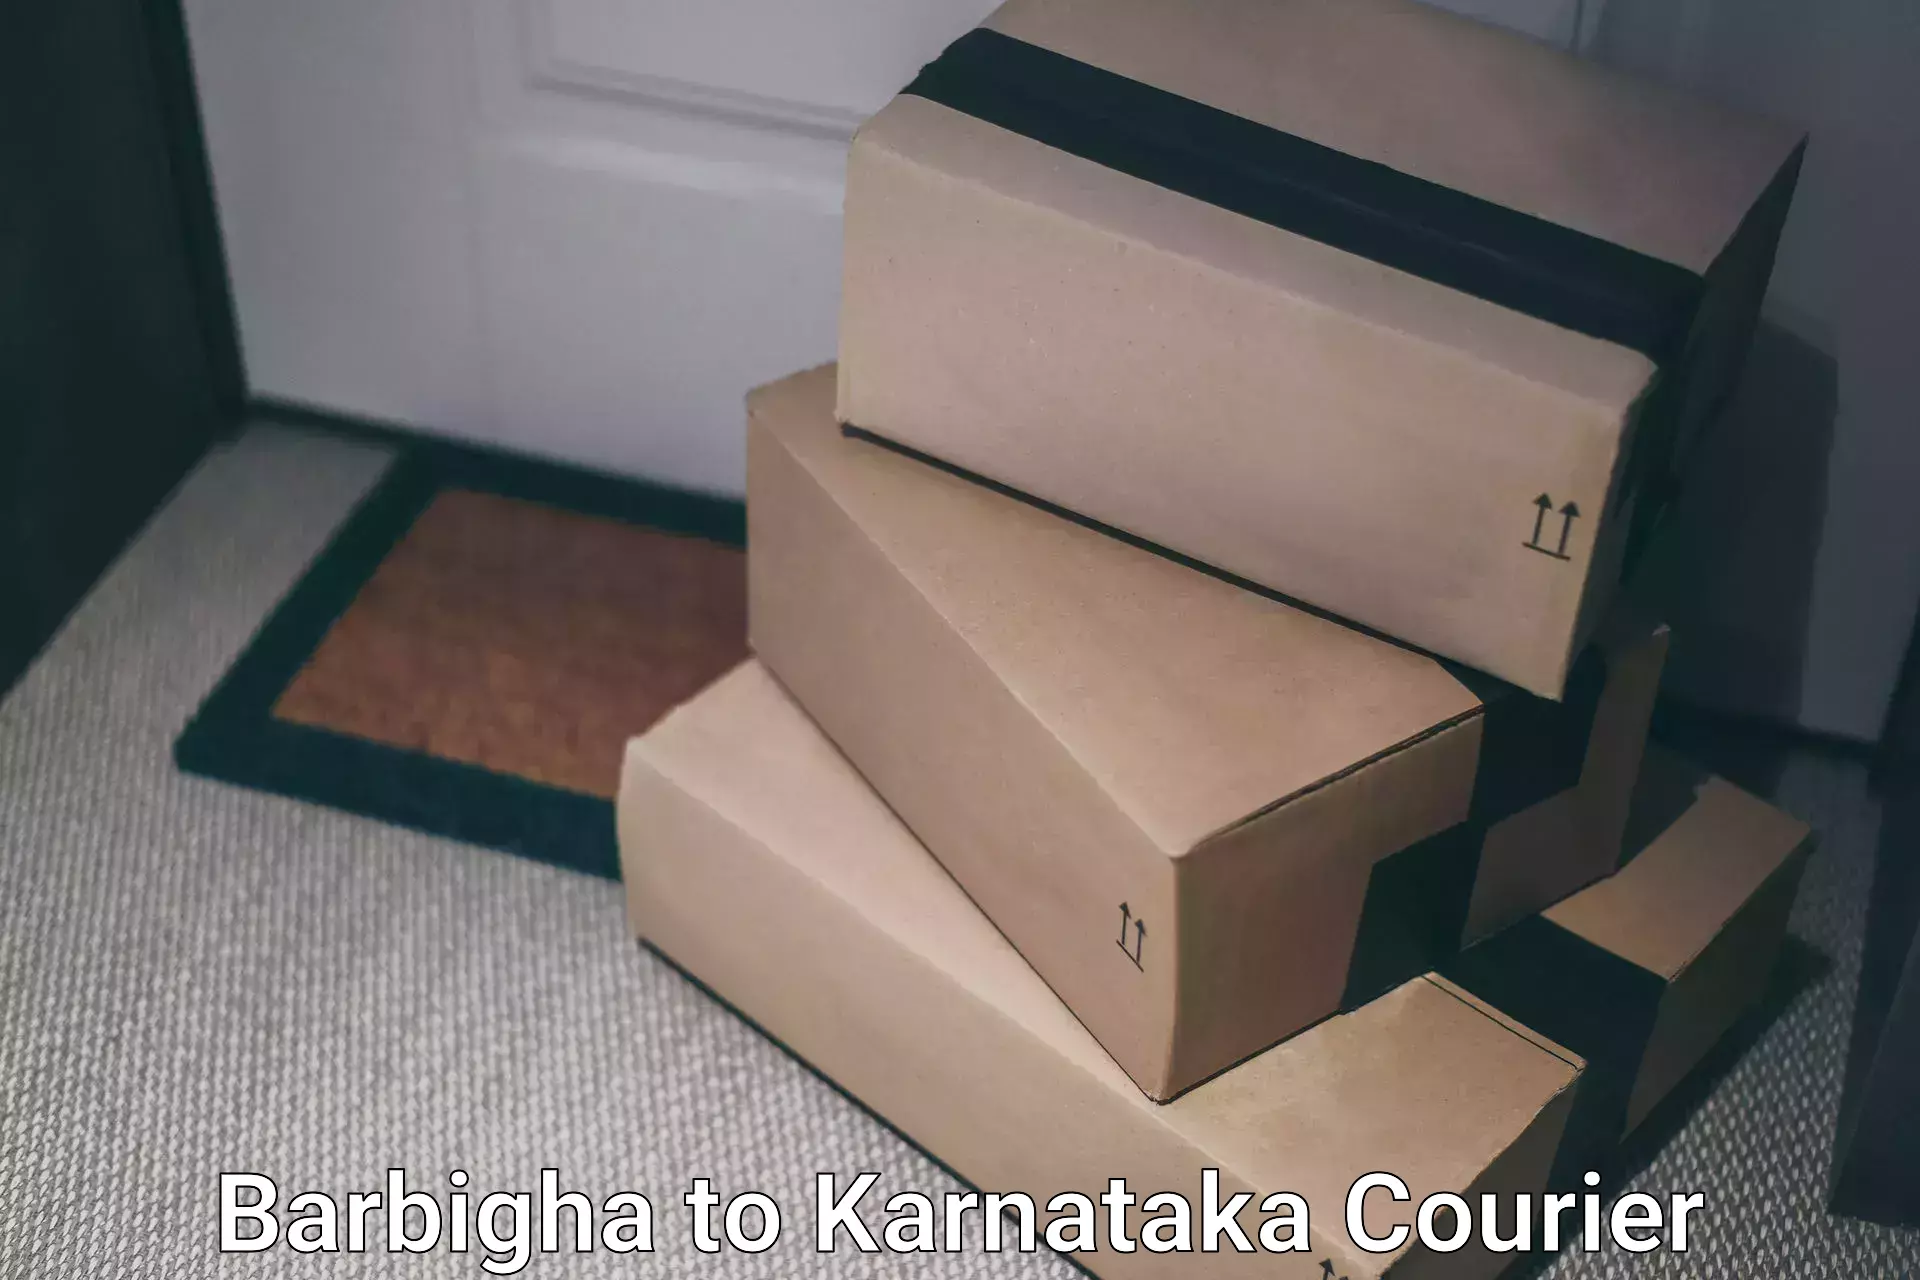 Professional courier services in Barbigha to Hospet